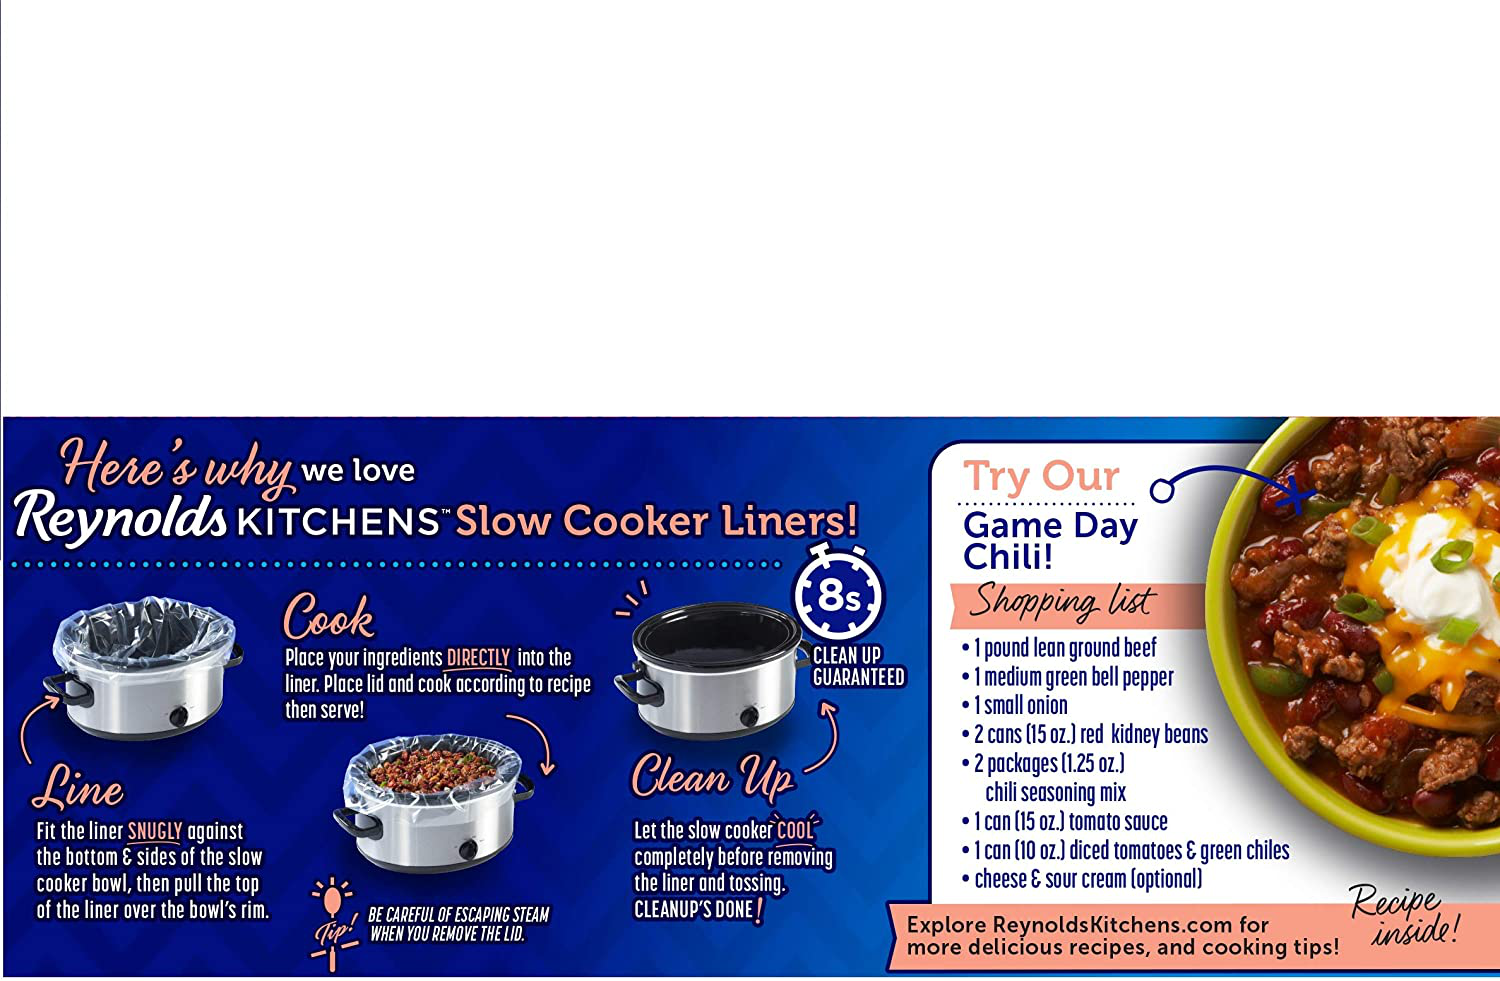 Reynolds Kitchens Slow Cooker Liners Regular Size 4 Liners / Pack of 12 (48 Total Liners)